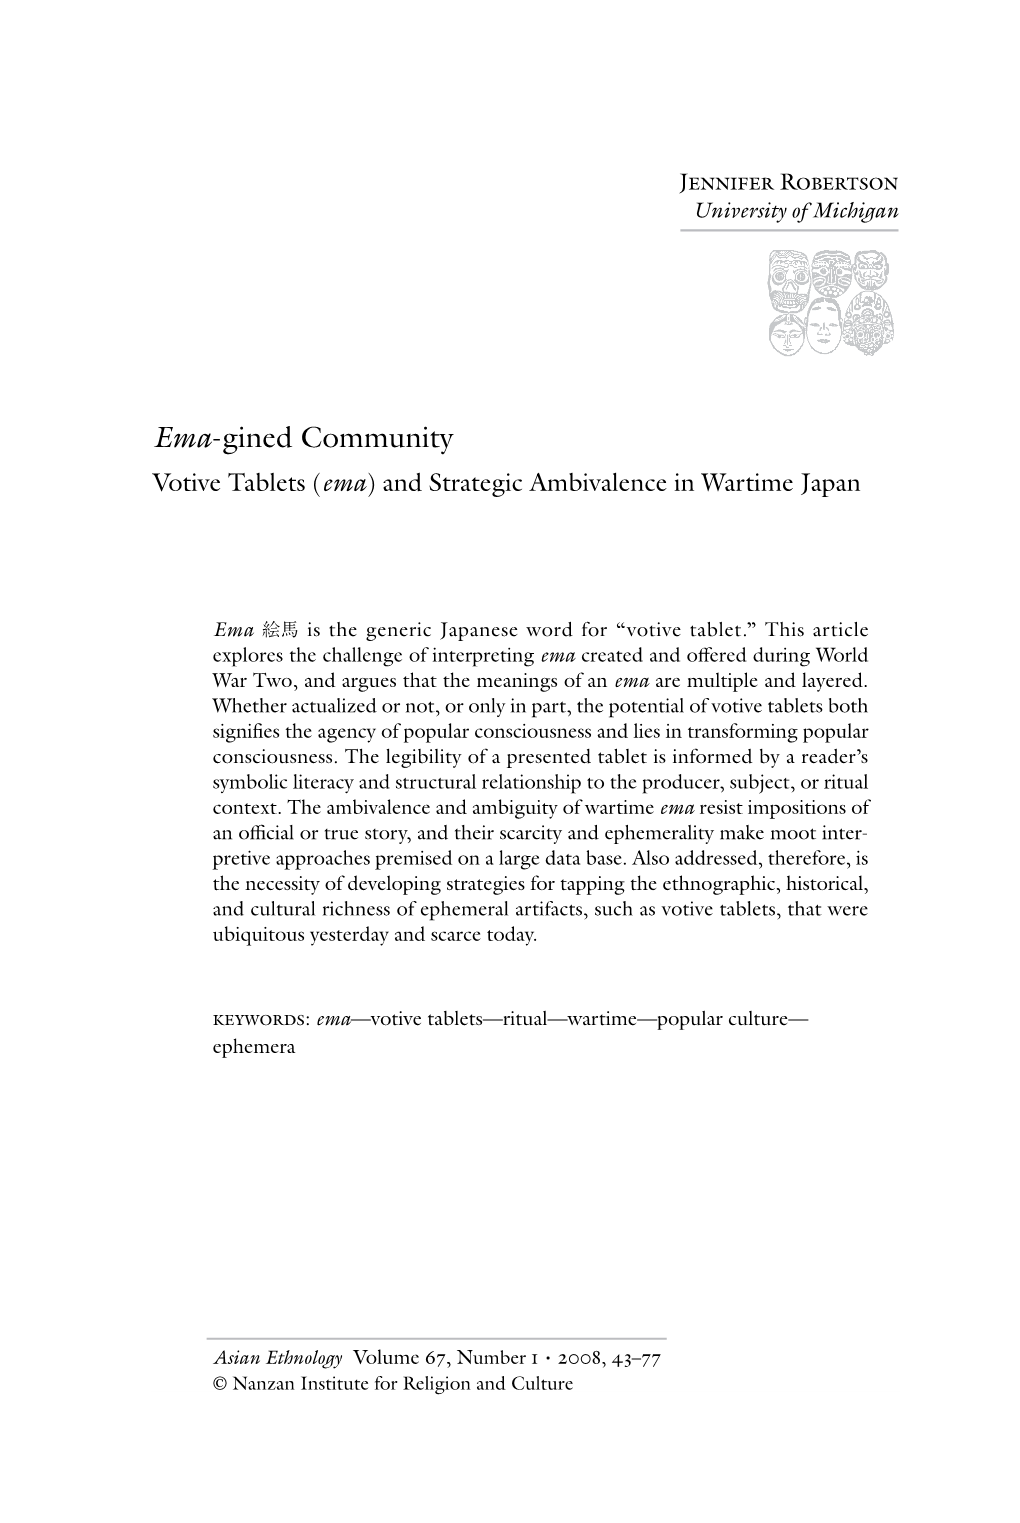 Votive Tablets (Ema) and Strategic Ambivalence in Wartime Japan